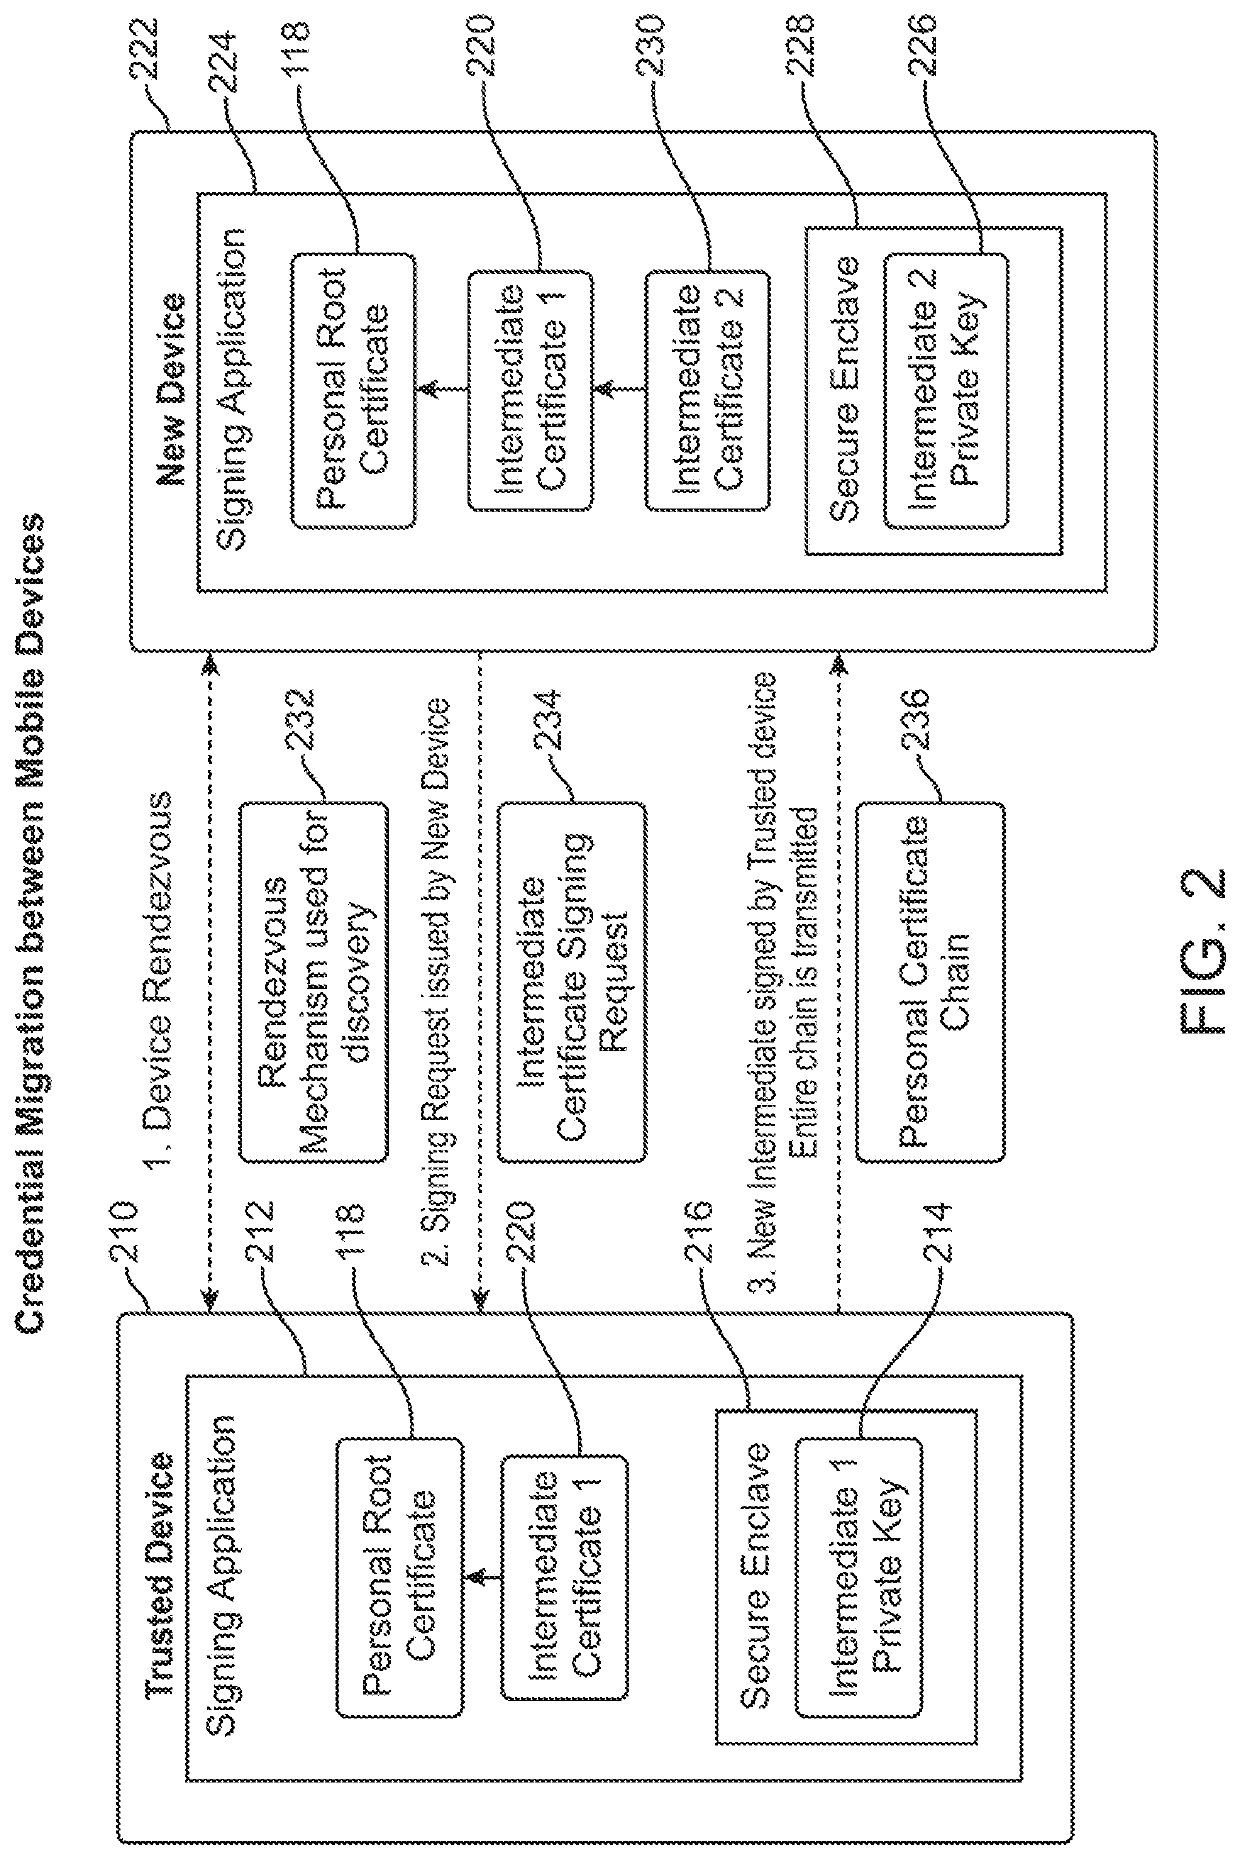 User authentication with self-signed certificate and identity verification